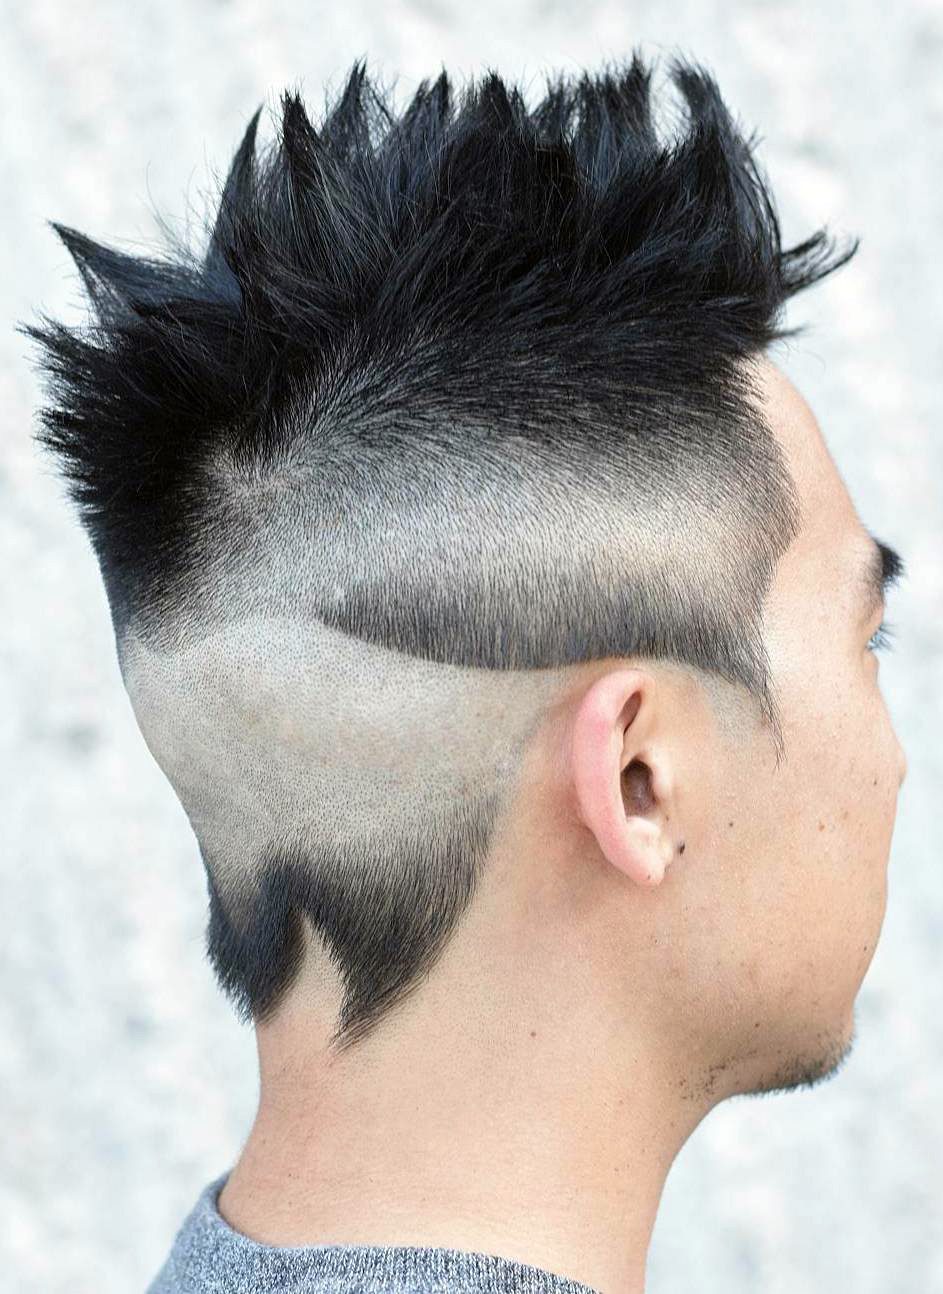 Weird and Crazy Hairstyles for Men | Haircut Inspiration